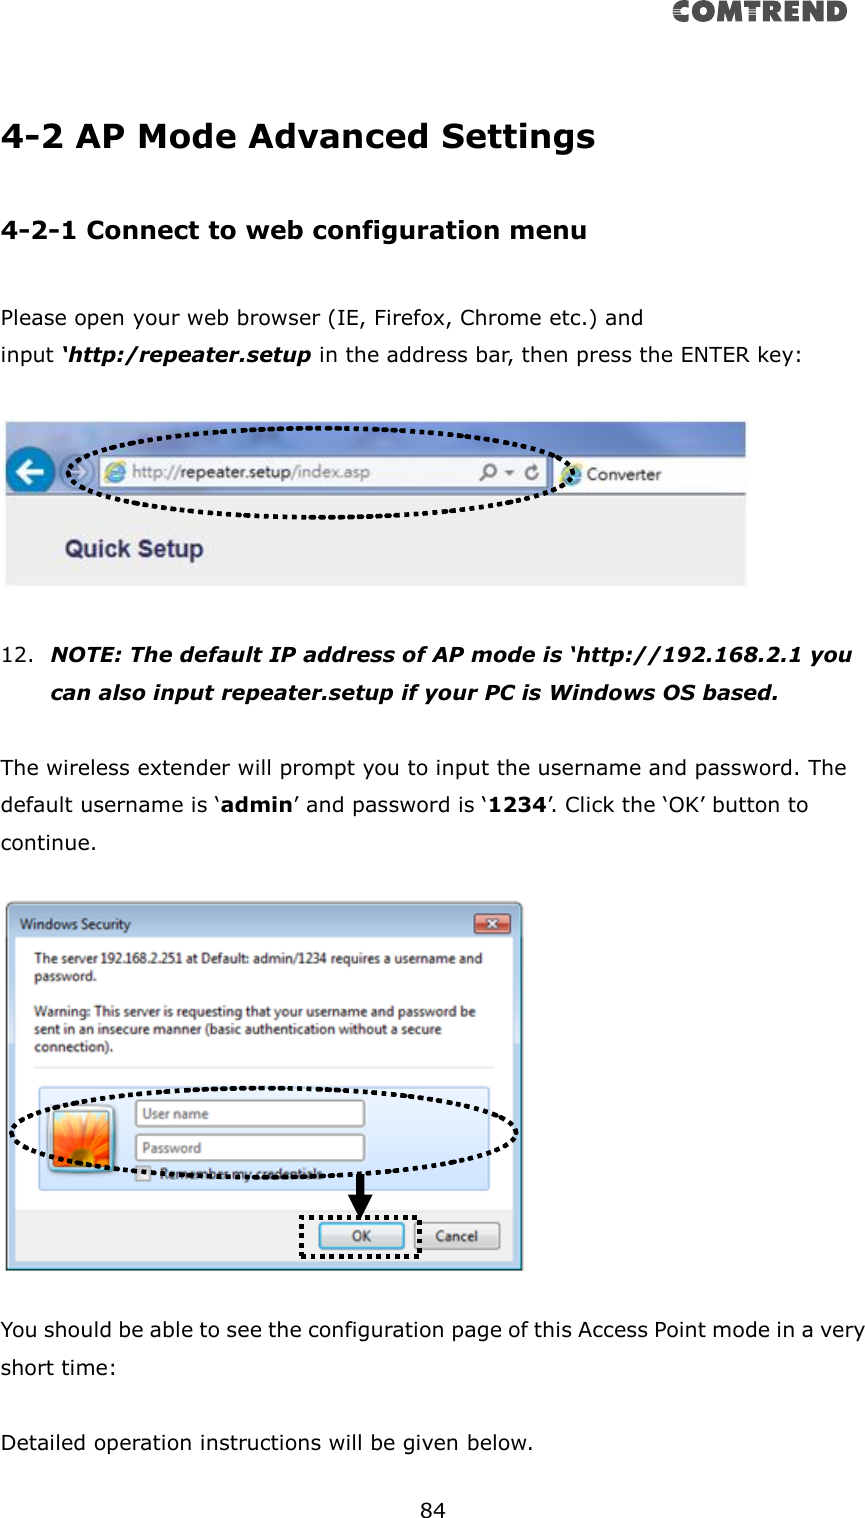       84   4-2 AP Mode Advanced Settings  4-2-1 Connect to web configuration menu  Please open your web browser (IE, Firefox, Chrome etc.) and   input ‘http:/repeater.setup in the address bar, then press the ENTER key:    12. NOTE: The default IP address of AP mode is ‘http://192.168.2.1 you can also input repeater.setup if your PC is Windows OS based.  The wireless extender will prompt you to input the username and password. The default username is ‘admin’ and password is ‘1234’. Click the ‘OK’ button to continue.    You should be able to see the configuration page of this Access Point mode in a very short time:  Detailed operation instructions will be given below.  